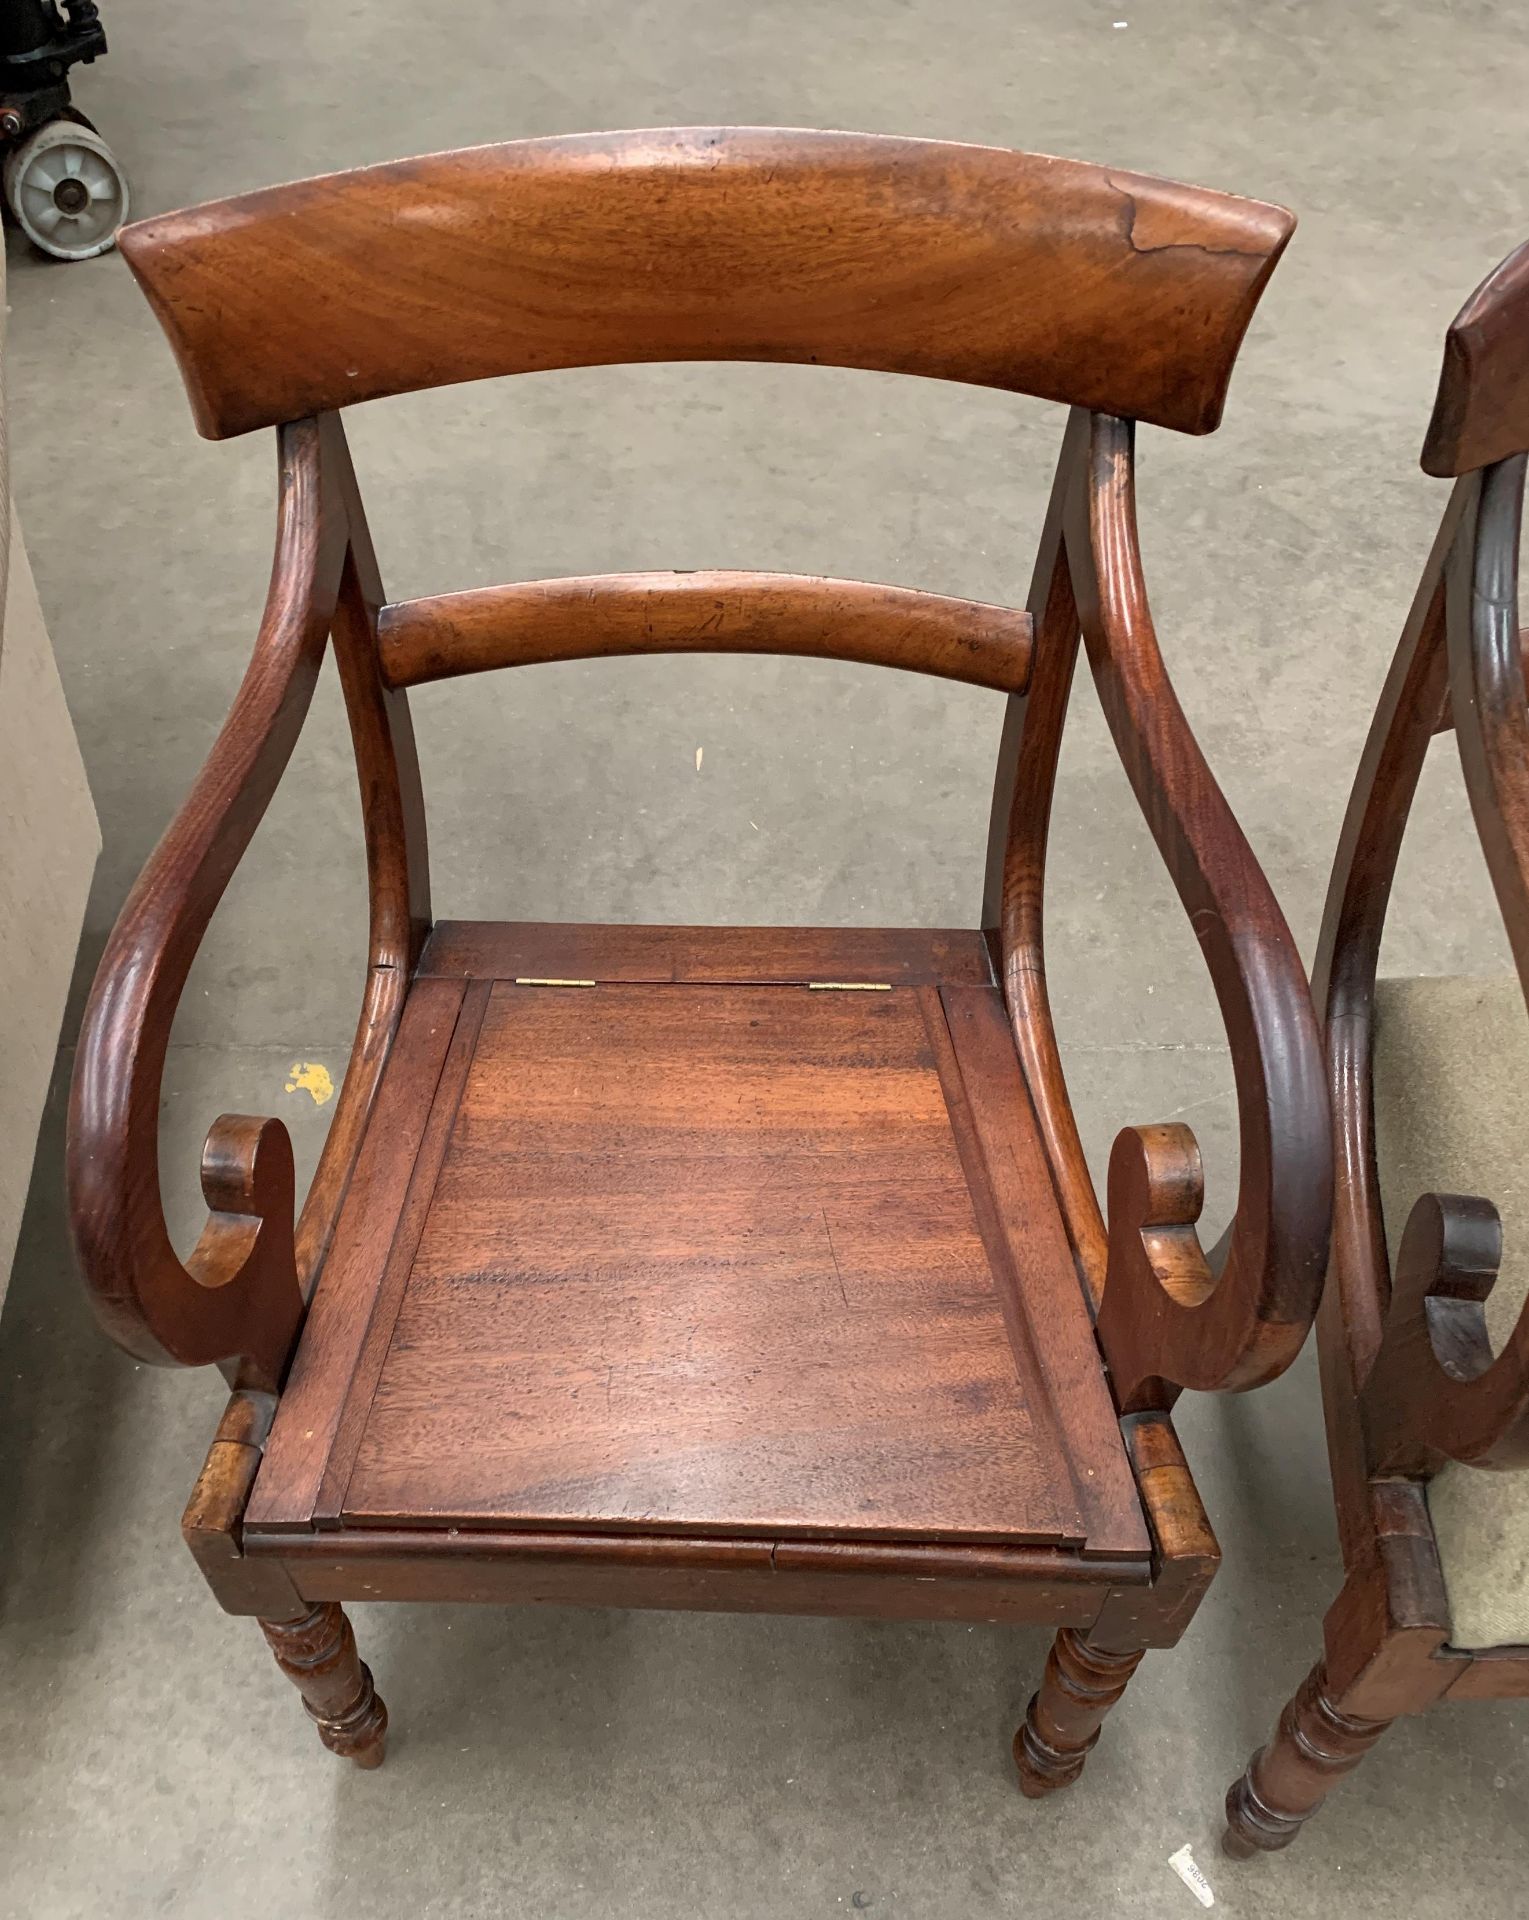 A mahogany framed armchair with green upholstered seat and a similar commode armchair - no bowl - Image 2 of 3